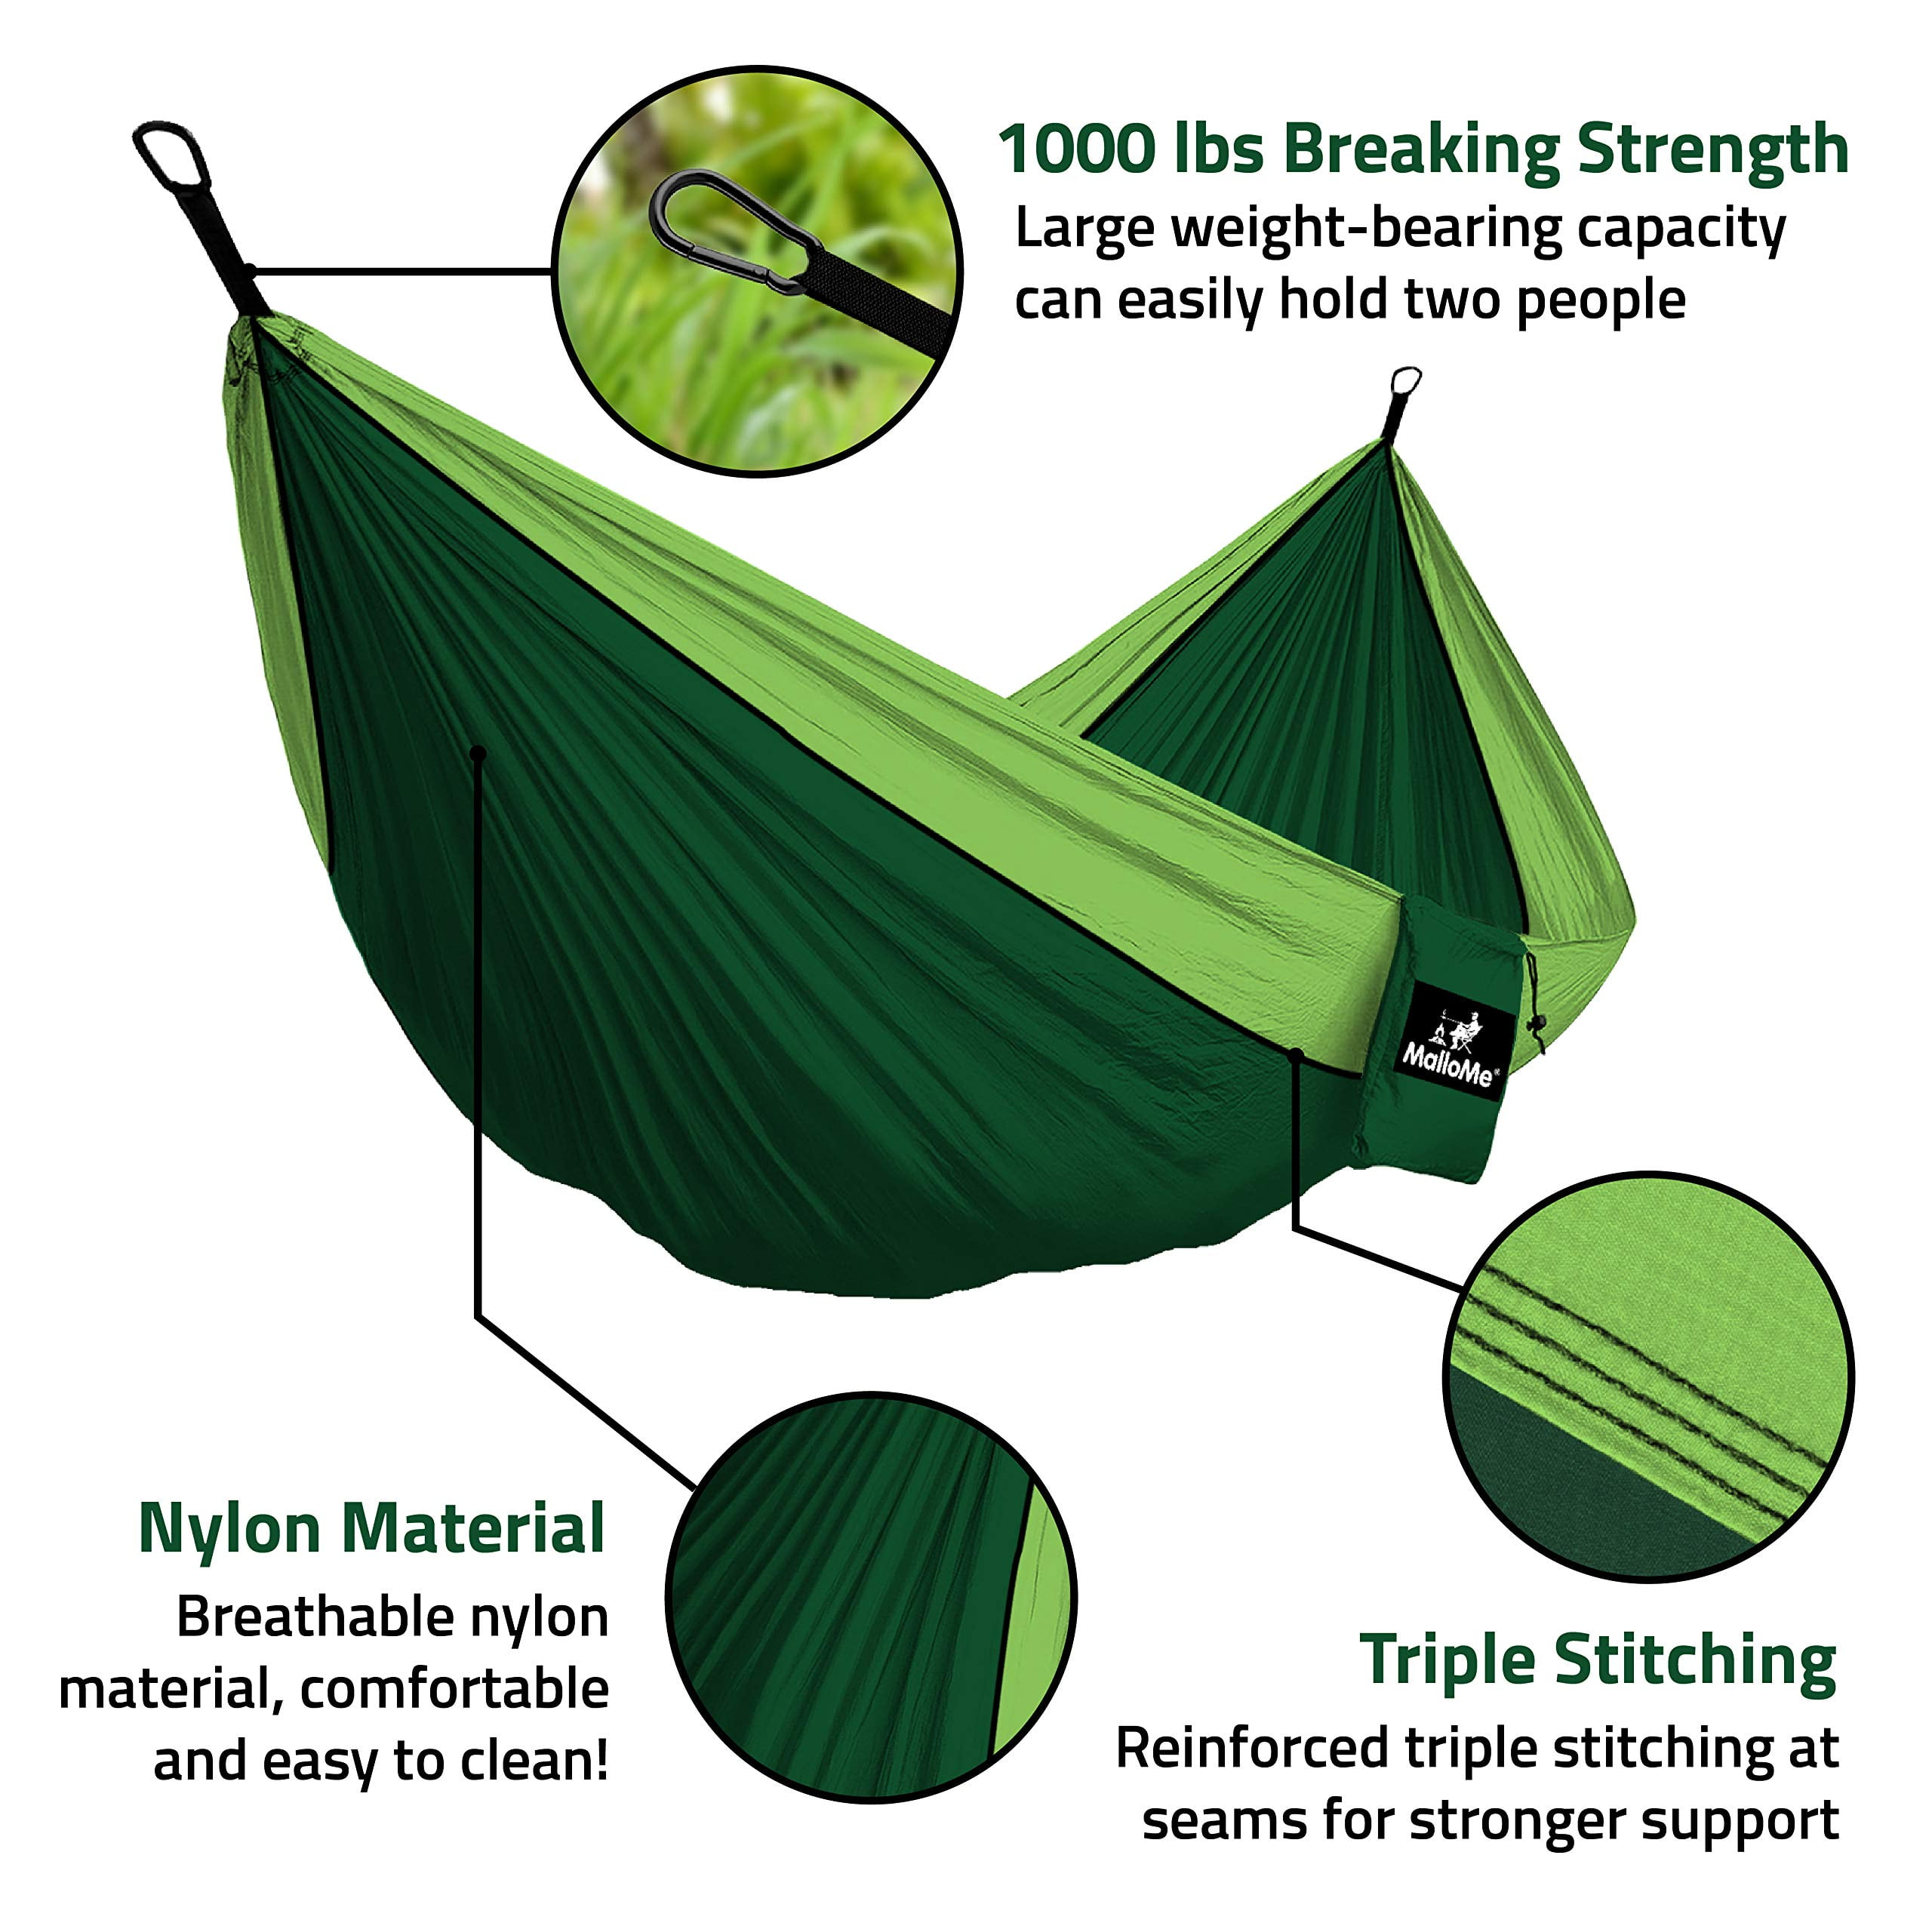 Outdoor Indoor 2 Person Beach Accessories Two Carabiners Free MalloMe Hammock Camping Portable Double Tree Hammocks Backpacking Travel Equipment Kids Max 1000 lbs Breaking Capacity 